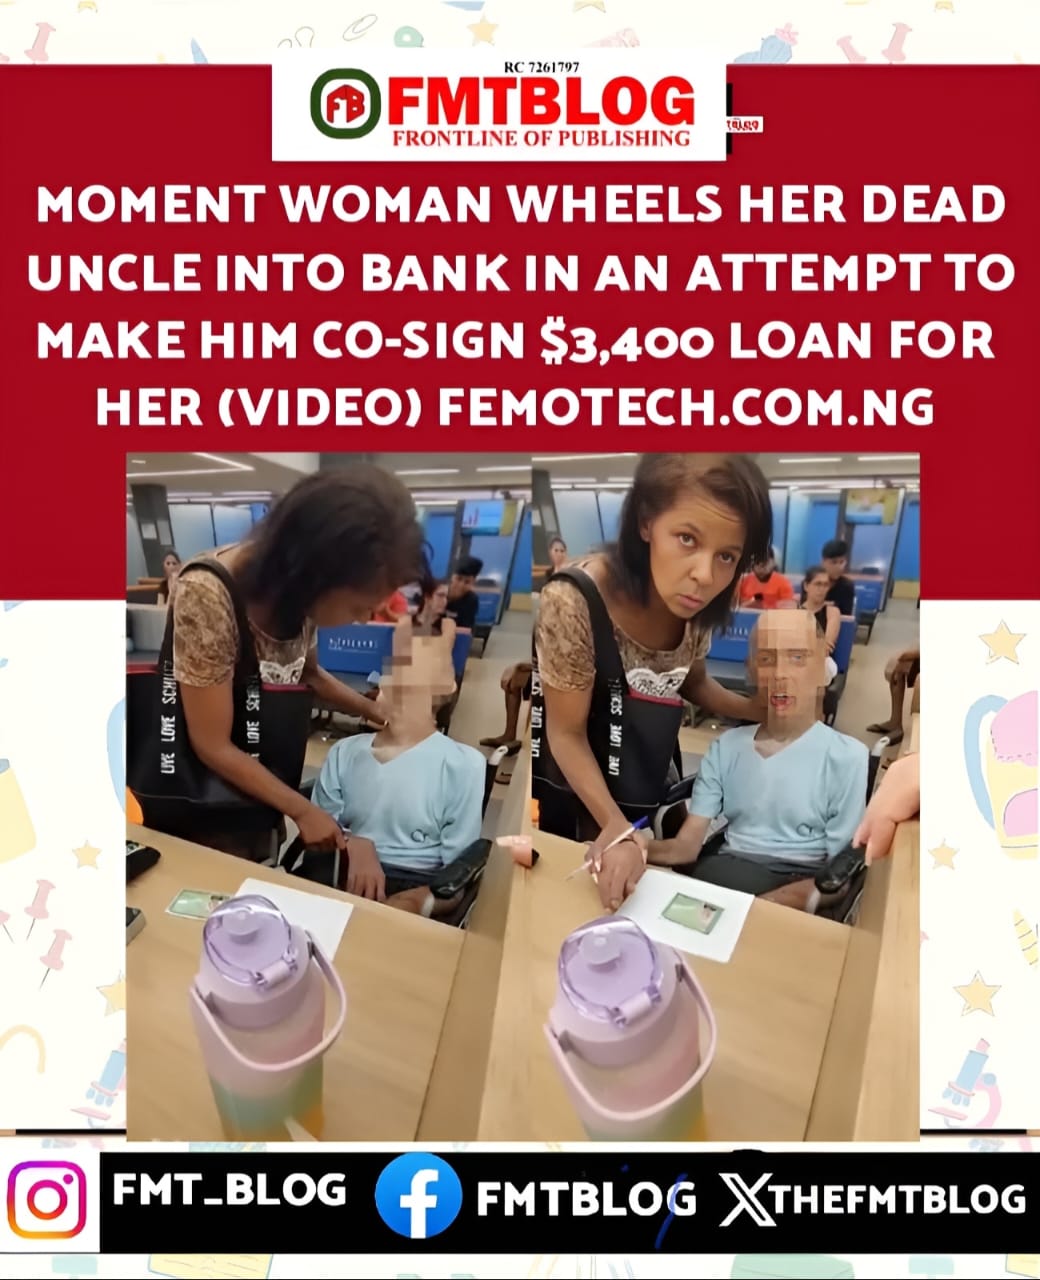 Moment Woman Wheels Her Dead Uncle Into Bank In An Attempt To Make Him Co-Sign $3,400 Loan For Her (VIDEO)